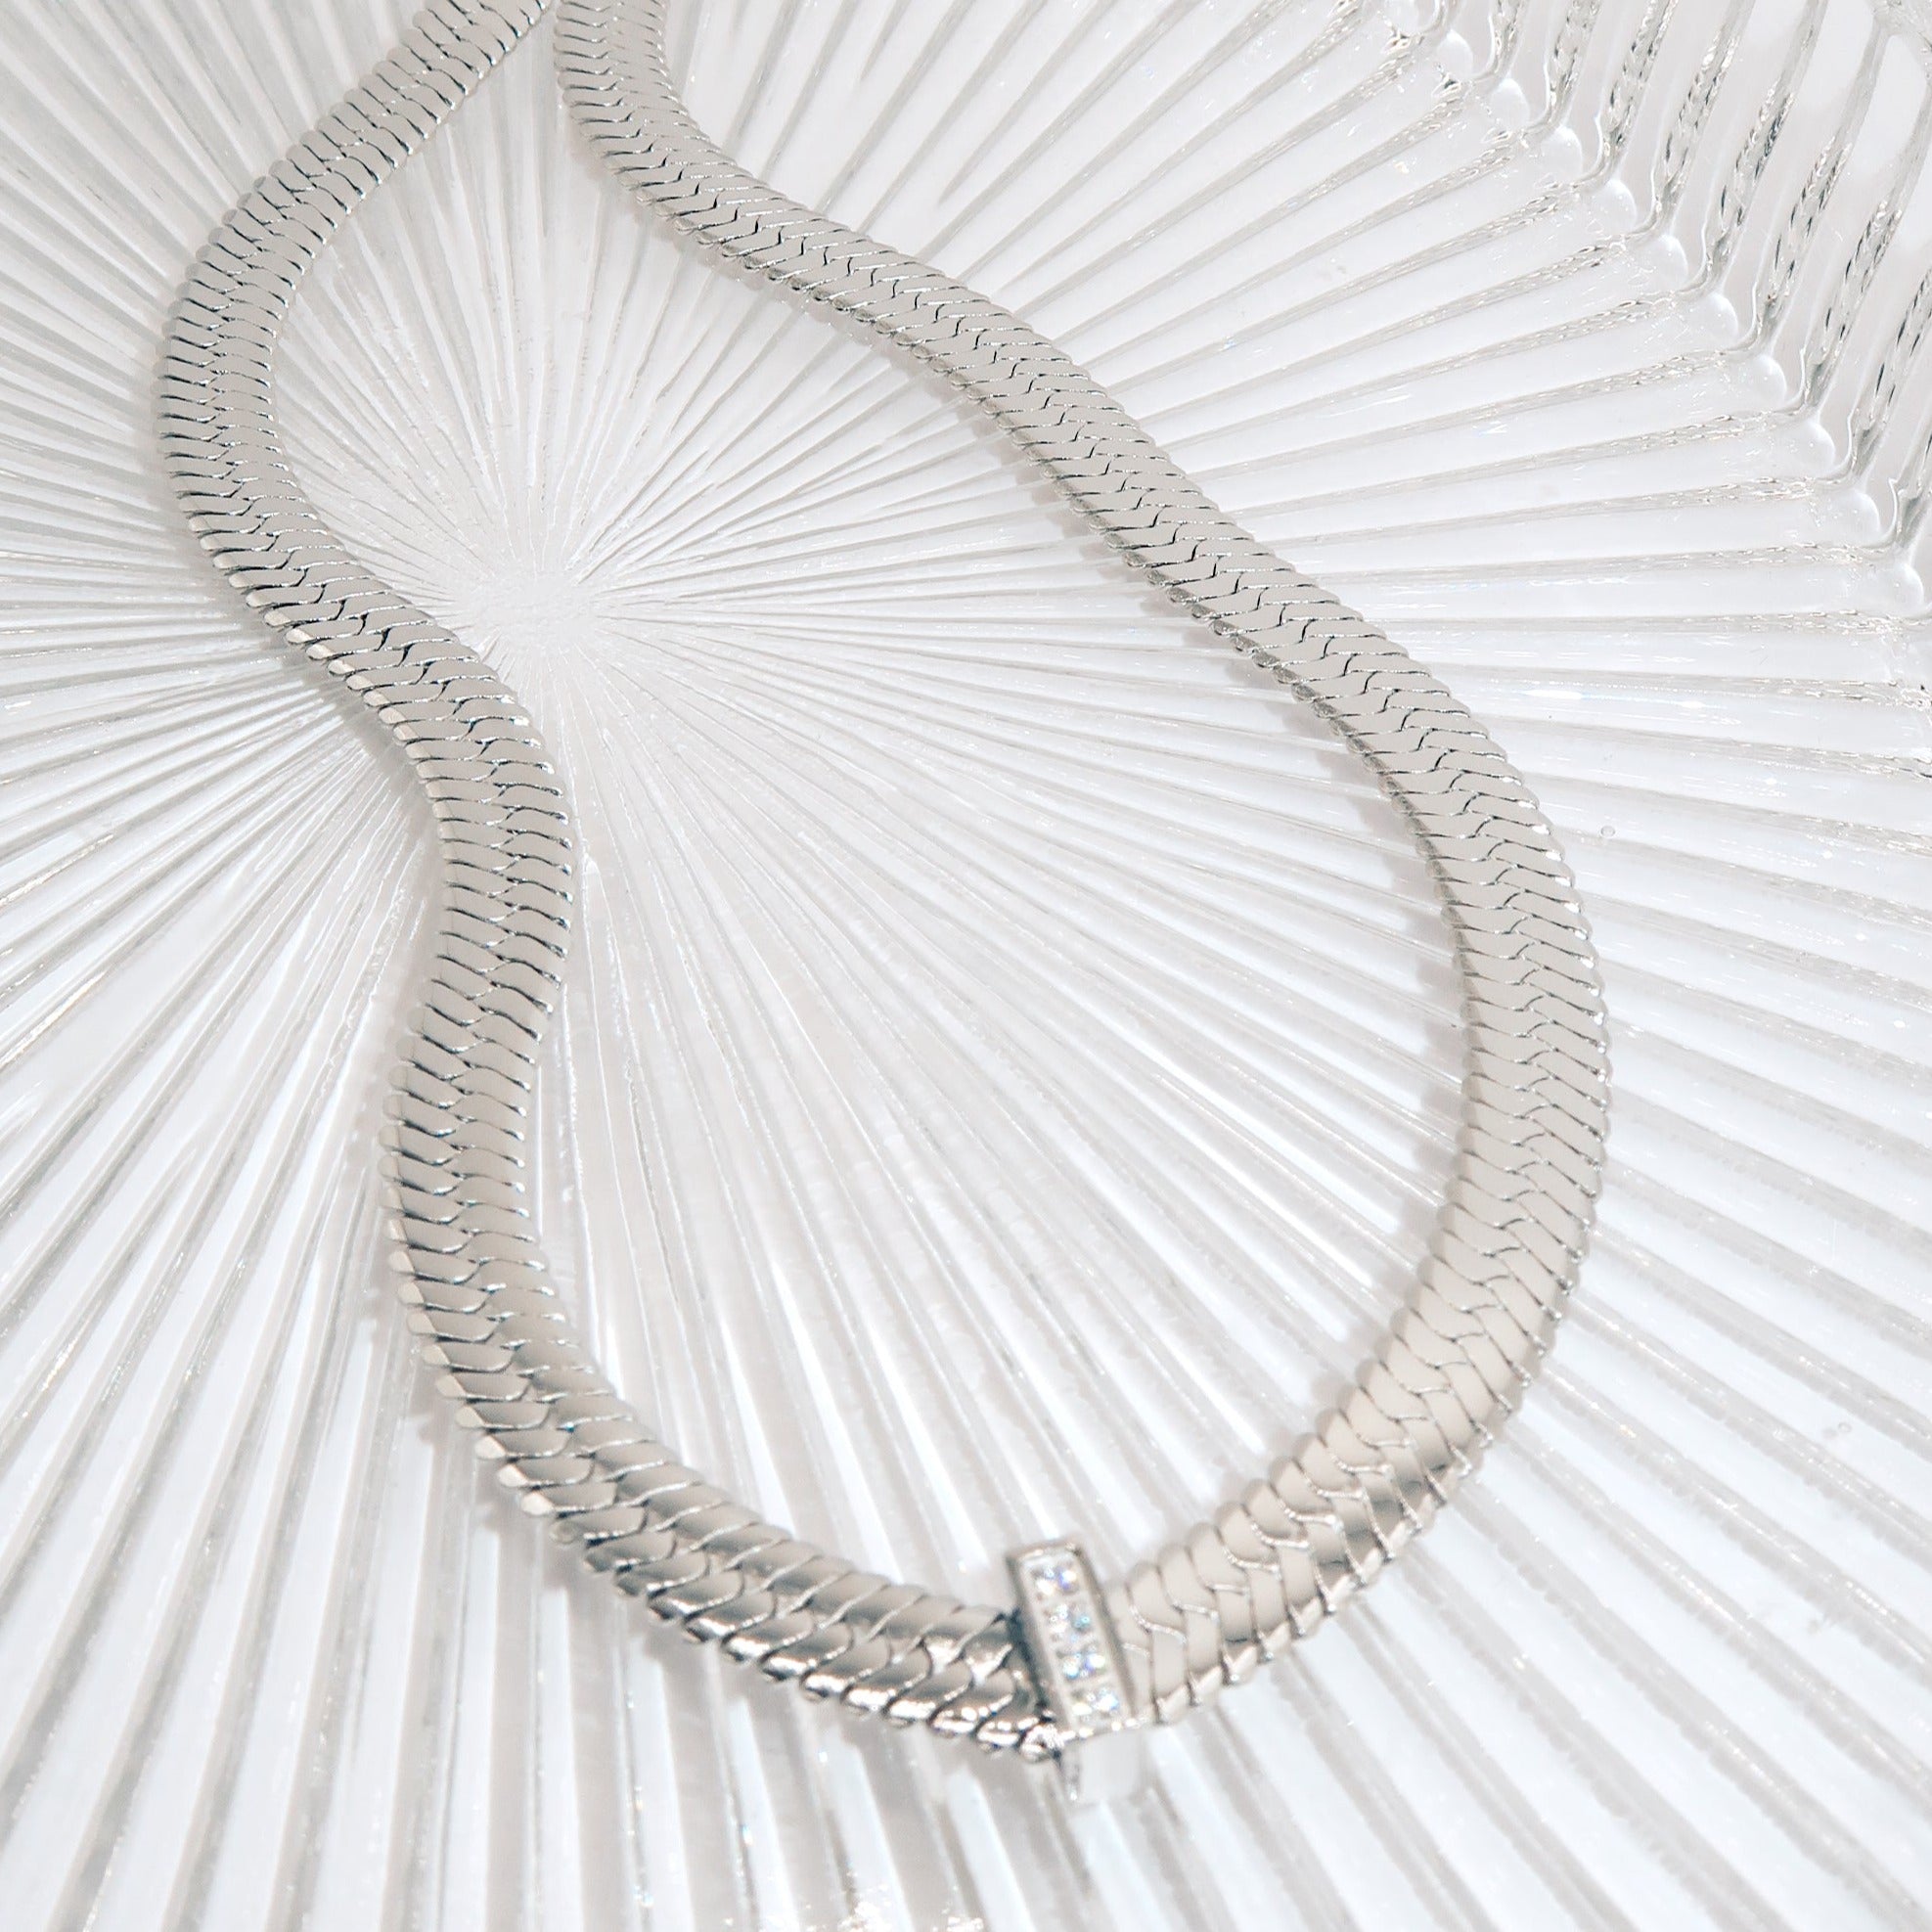 JOCELYN - 18K PVD Silver Plated Herringbone Chain Necklace with CZ Stone Pendant - Mixed Metals